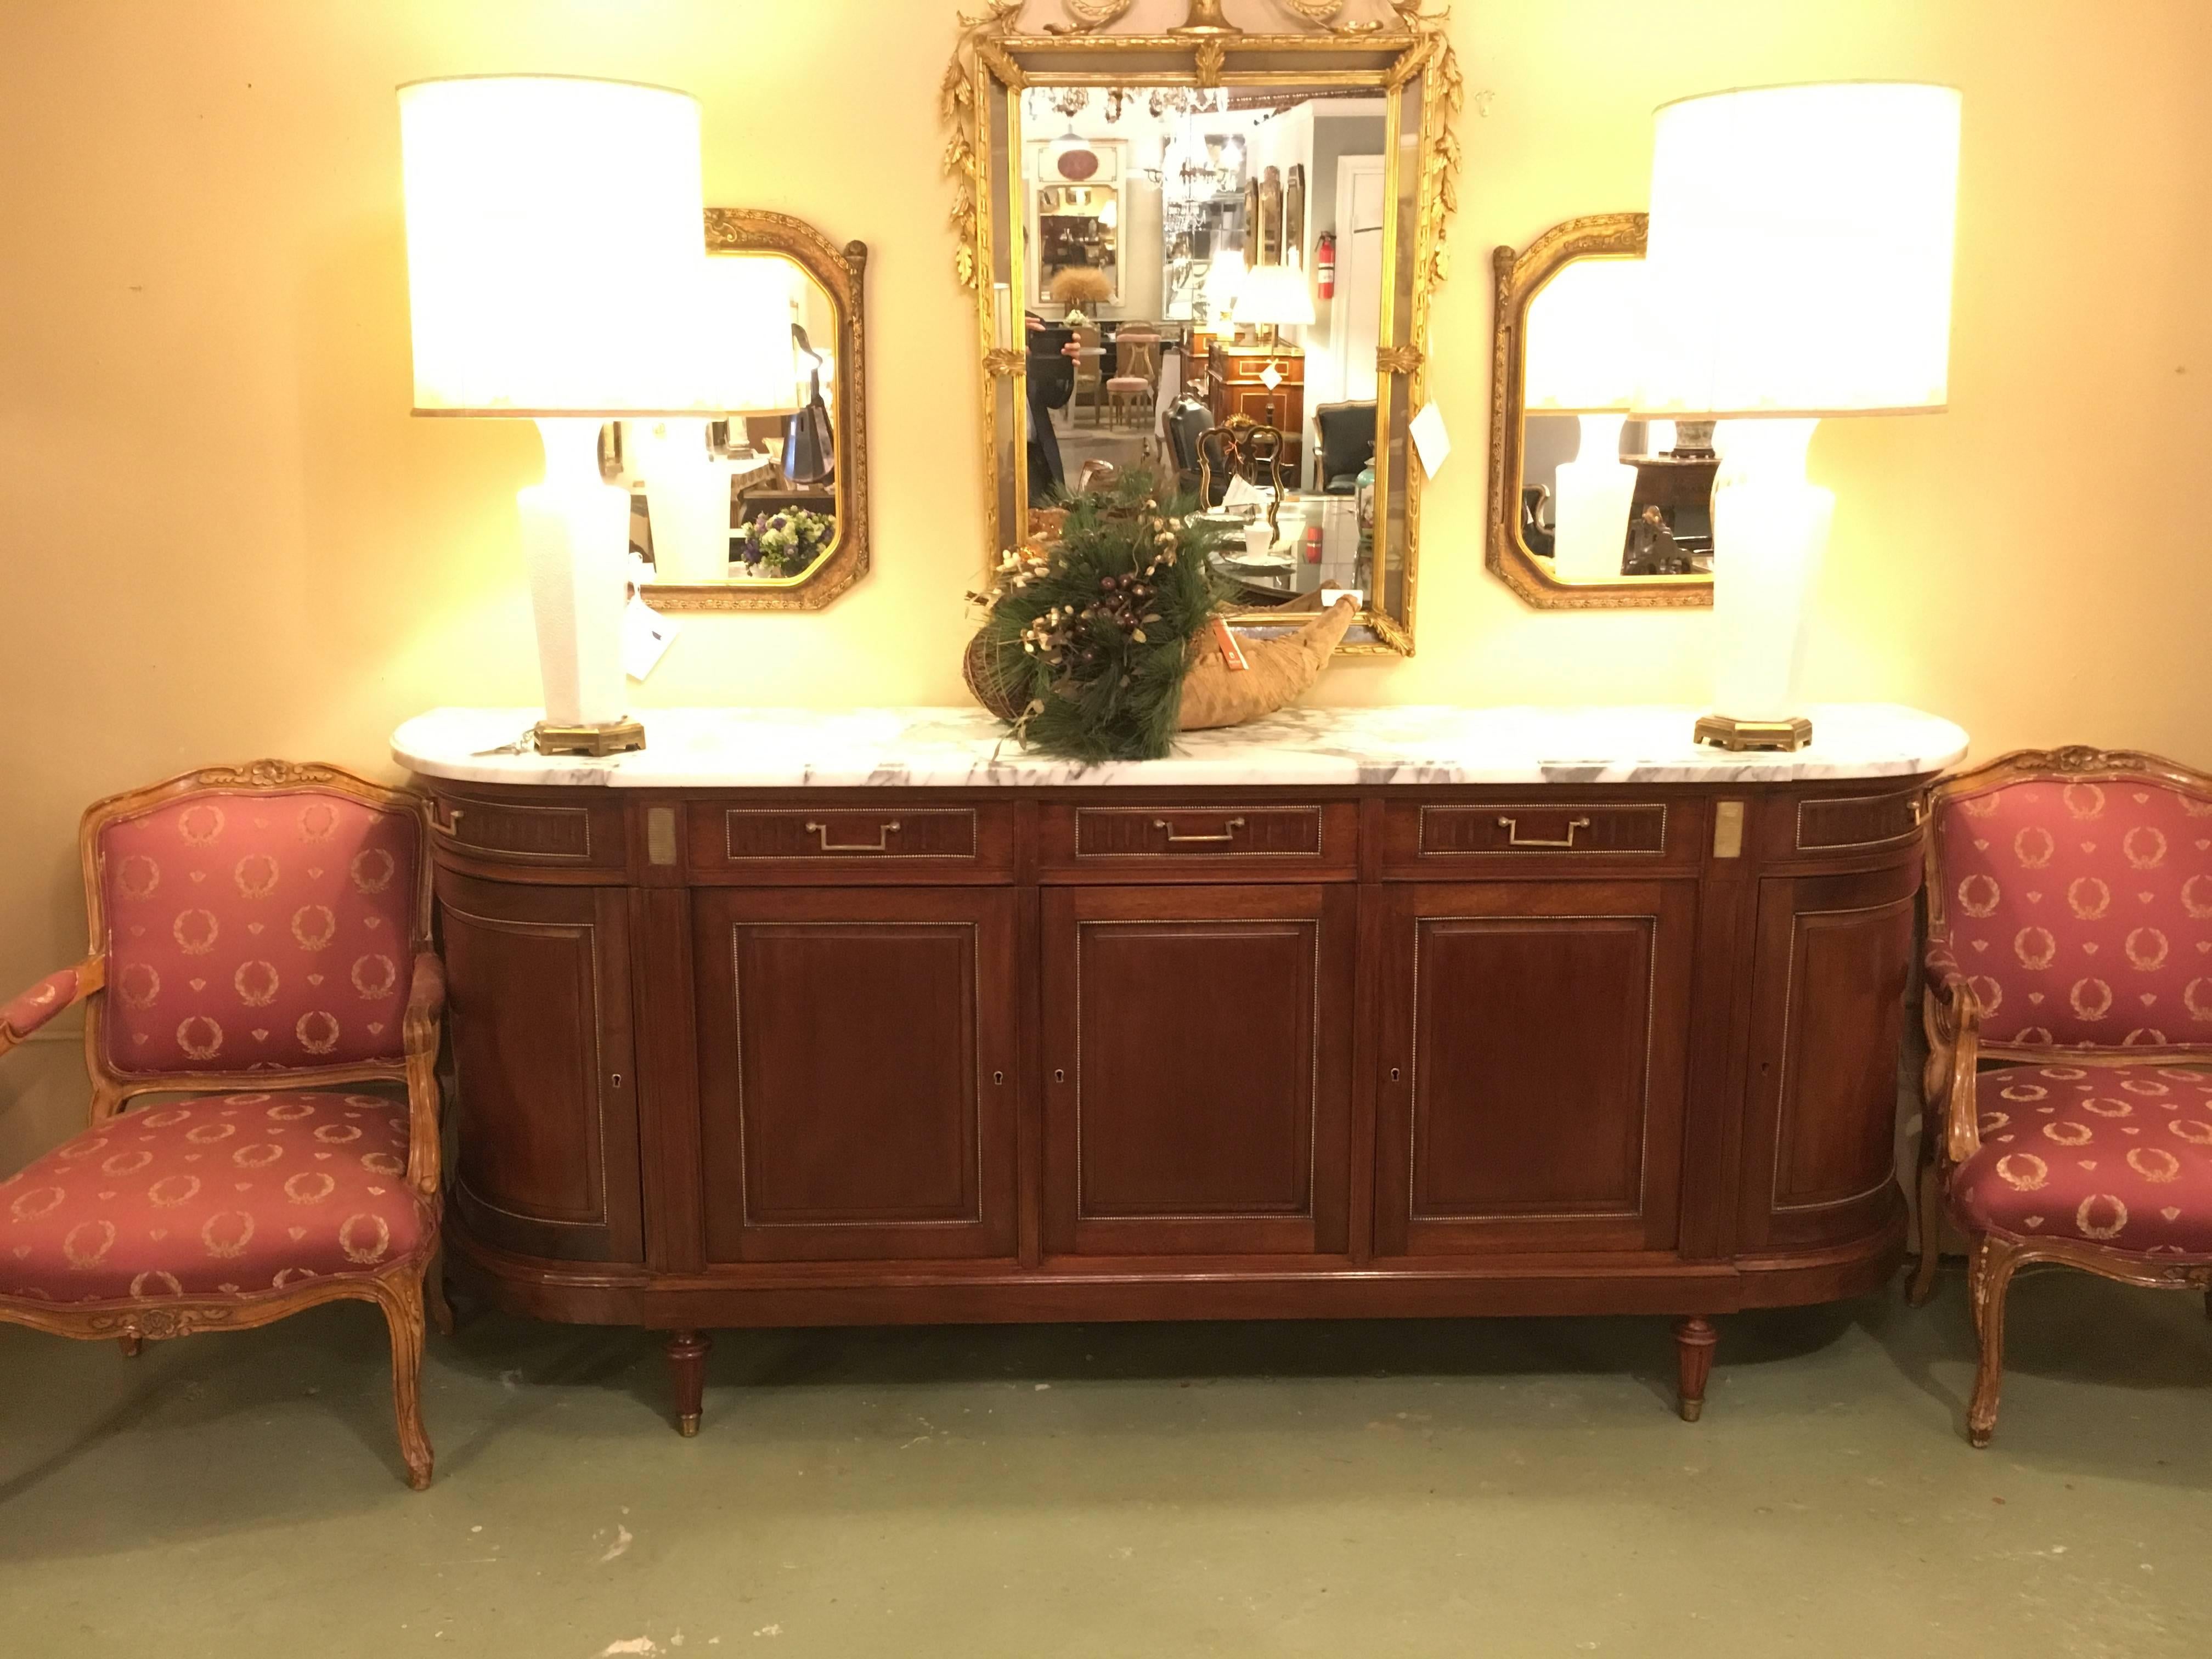 Monumental Maison Jansen marble top Directoire sideboard or console table In the Louis XV fashion. This is certainly a one of a kind find that is certain to have been commissioned by someone of worth or notability by Jansen. No stone unturned in